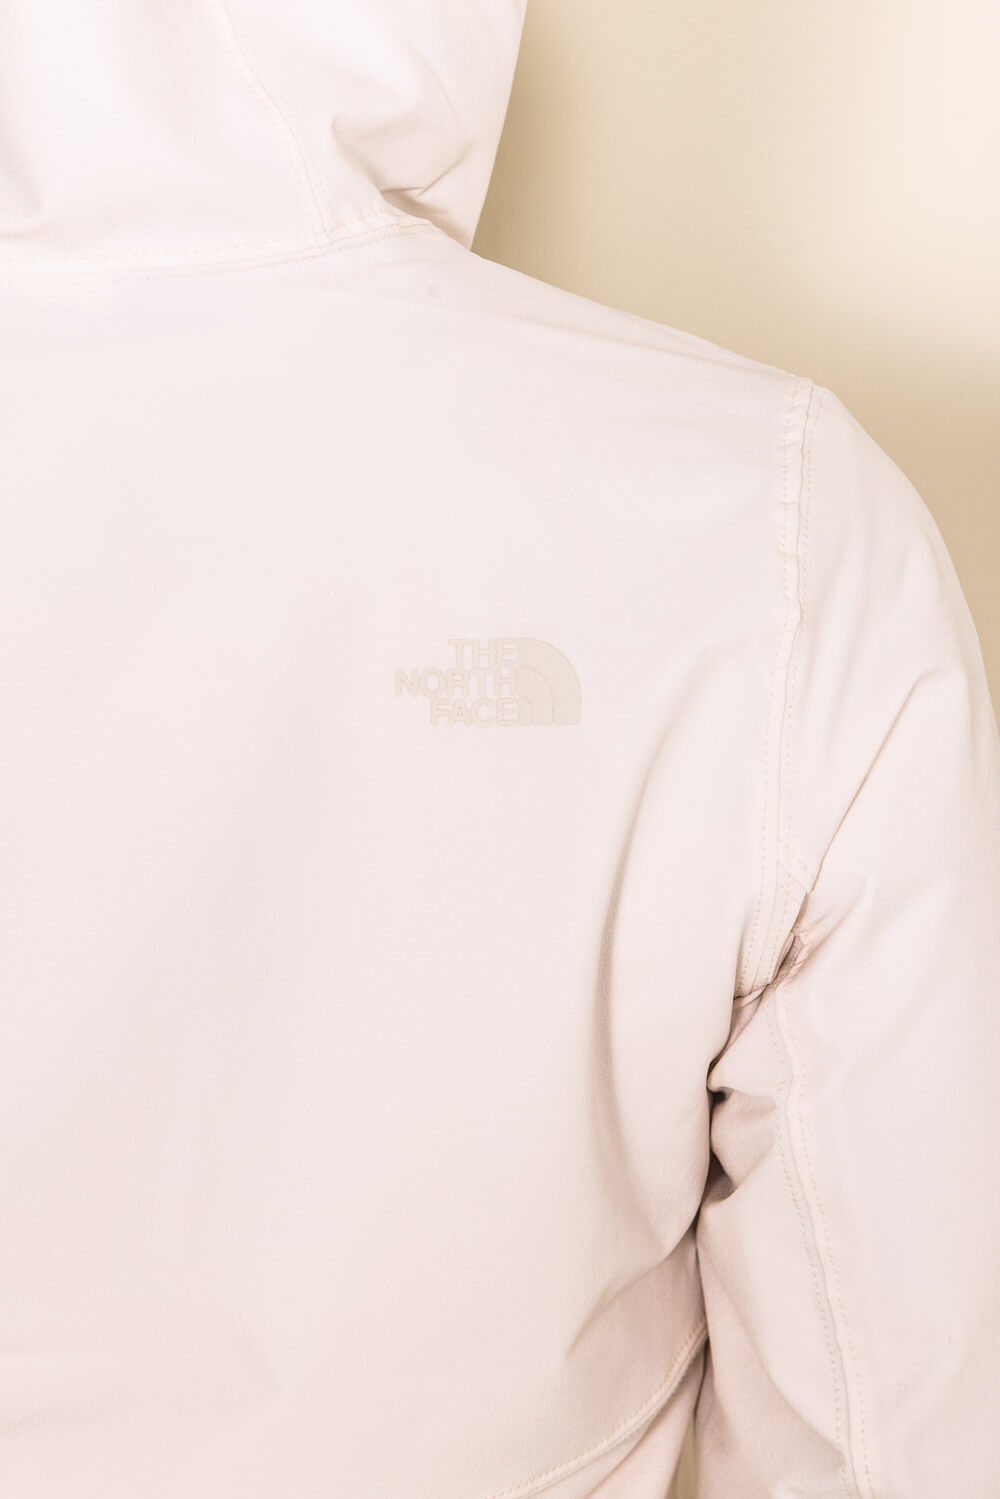 The North Face Shelbe Raschel Hoodie Jacket for Women in White | NF0A4 ...